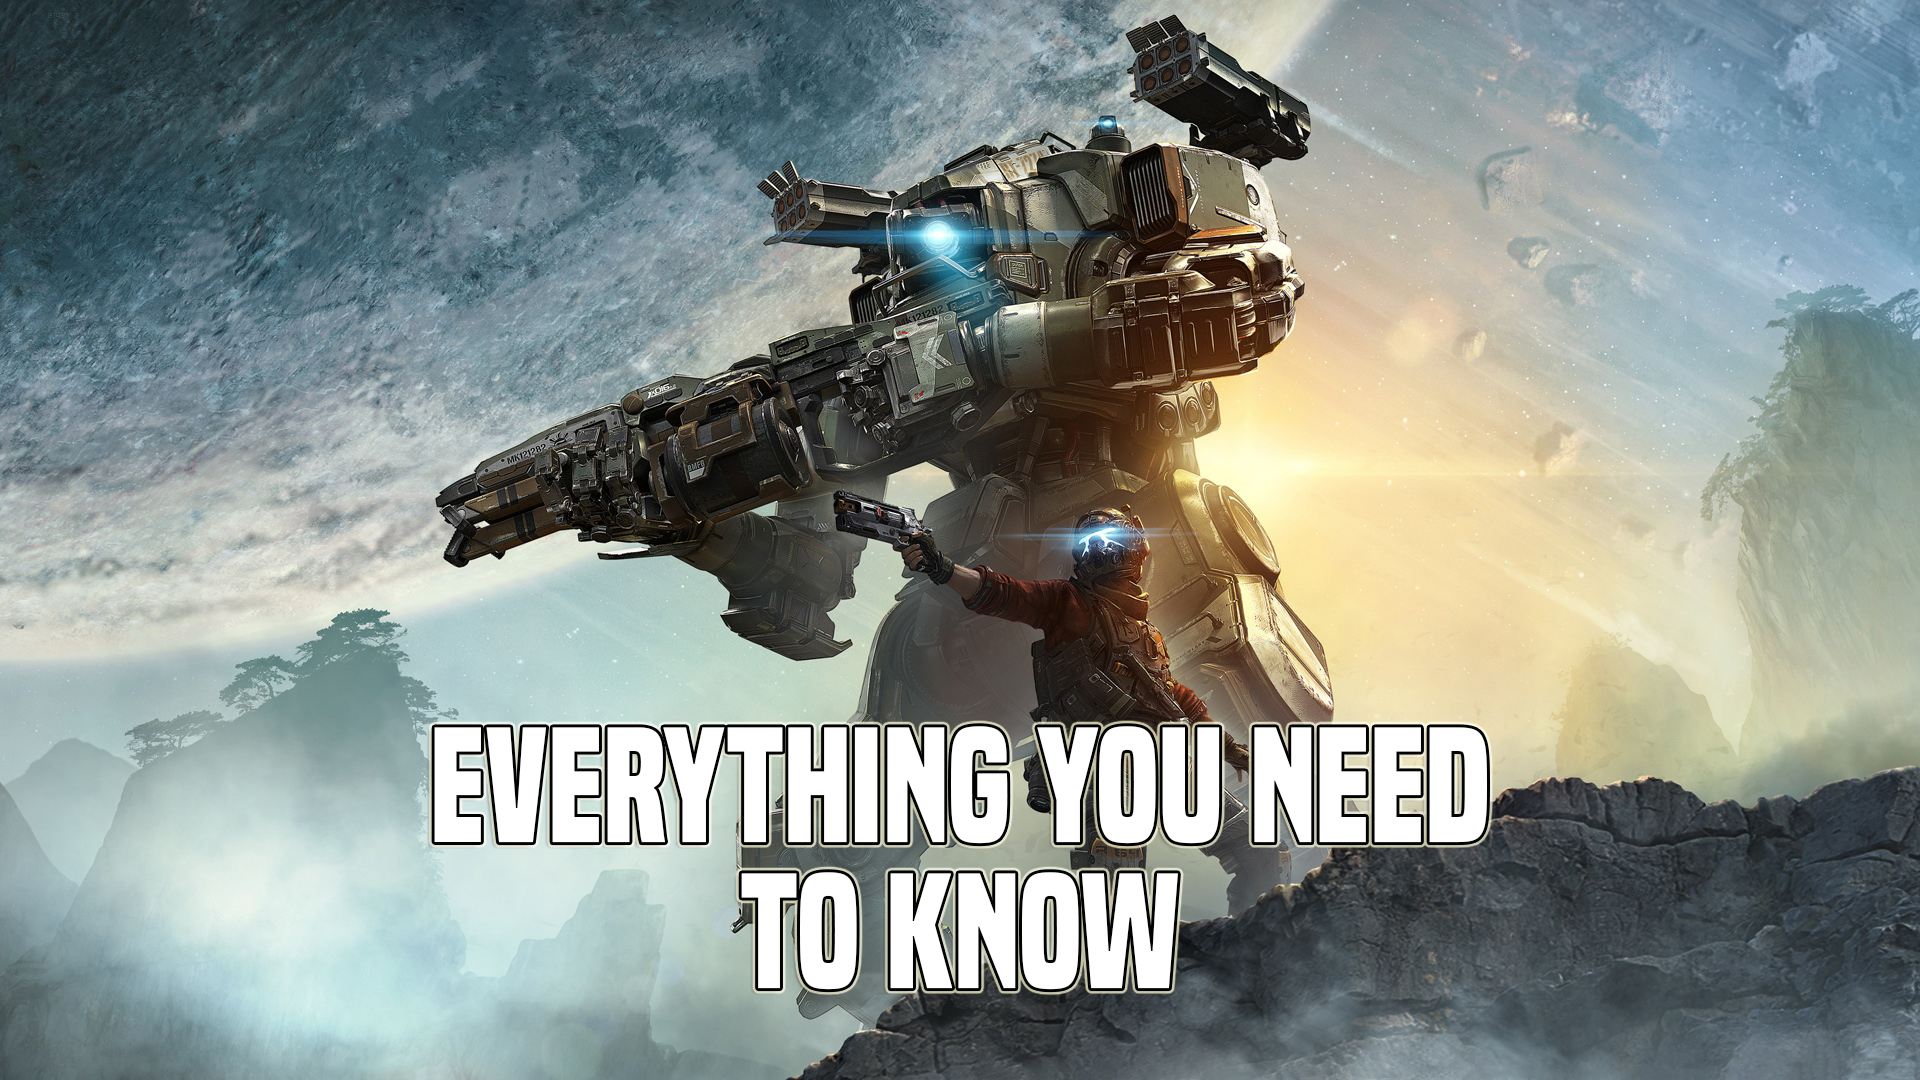 Titanfall 2 Info - Everything You Need to Know